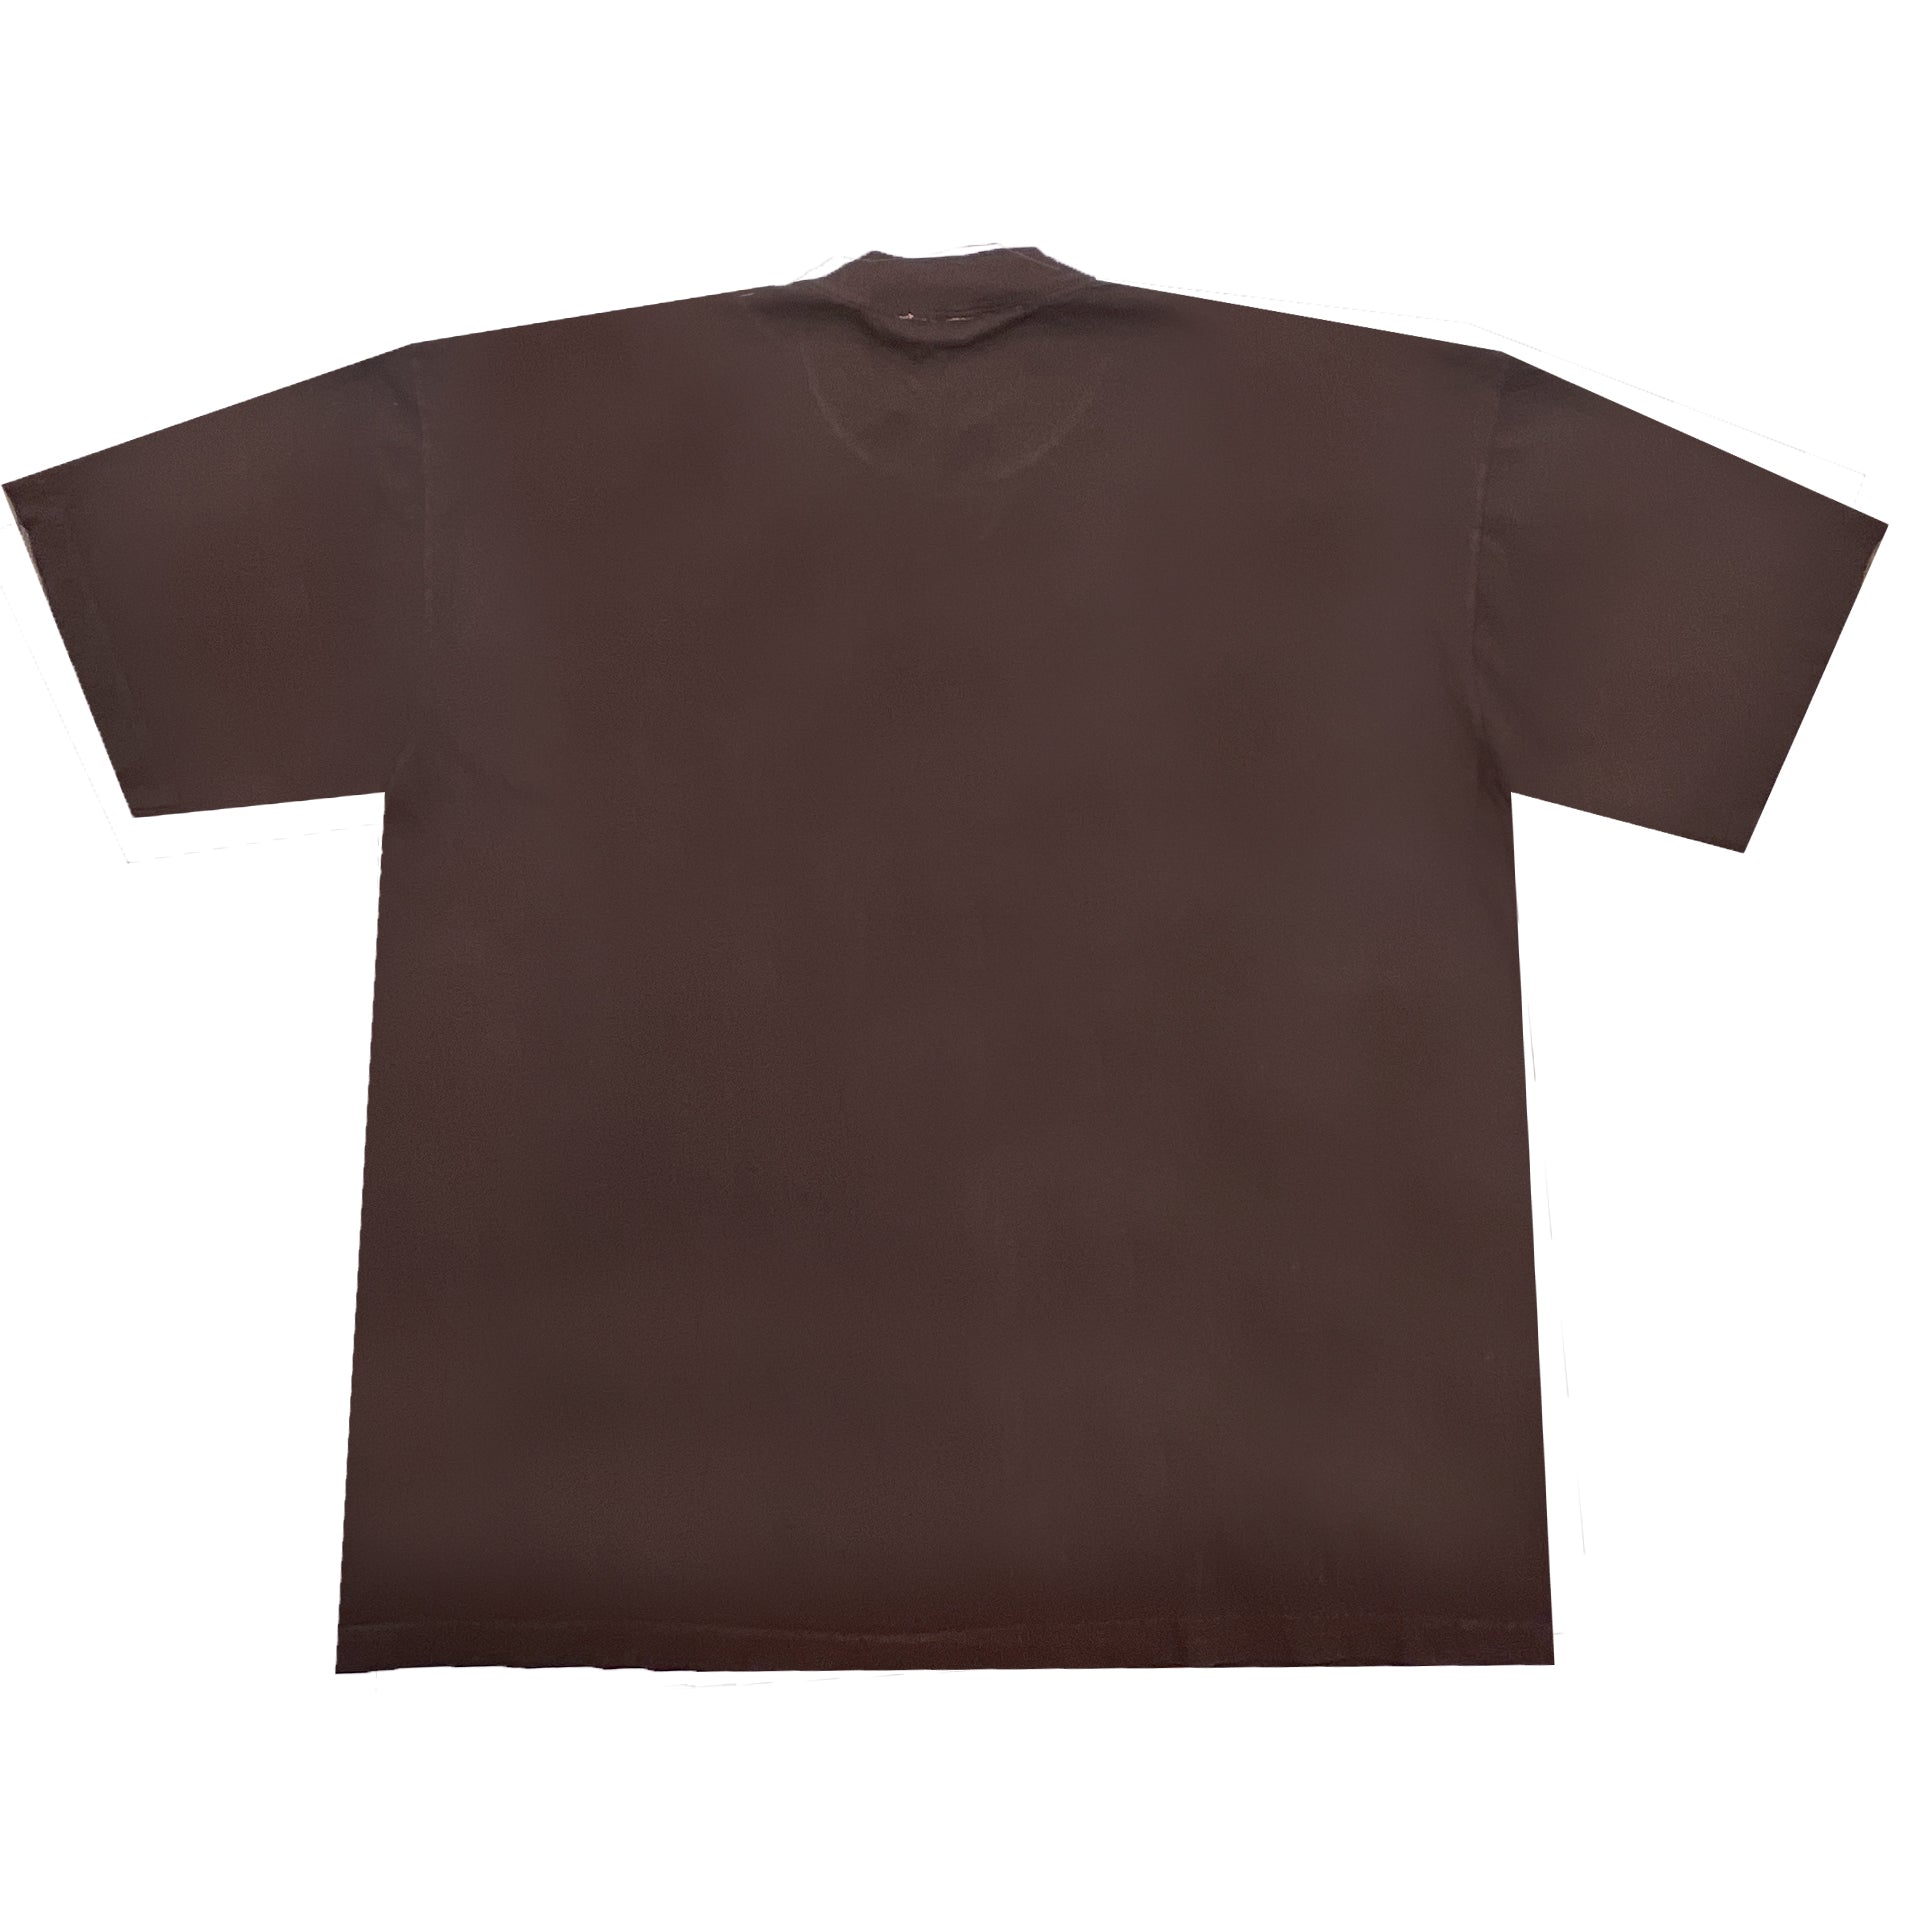 OVER-SIZED "Beloved" Chocolate Tees